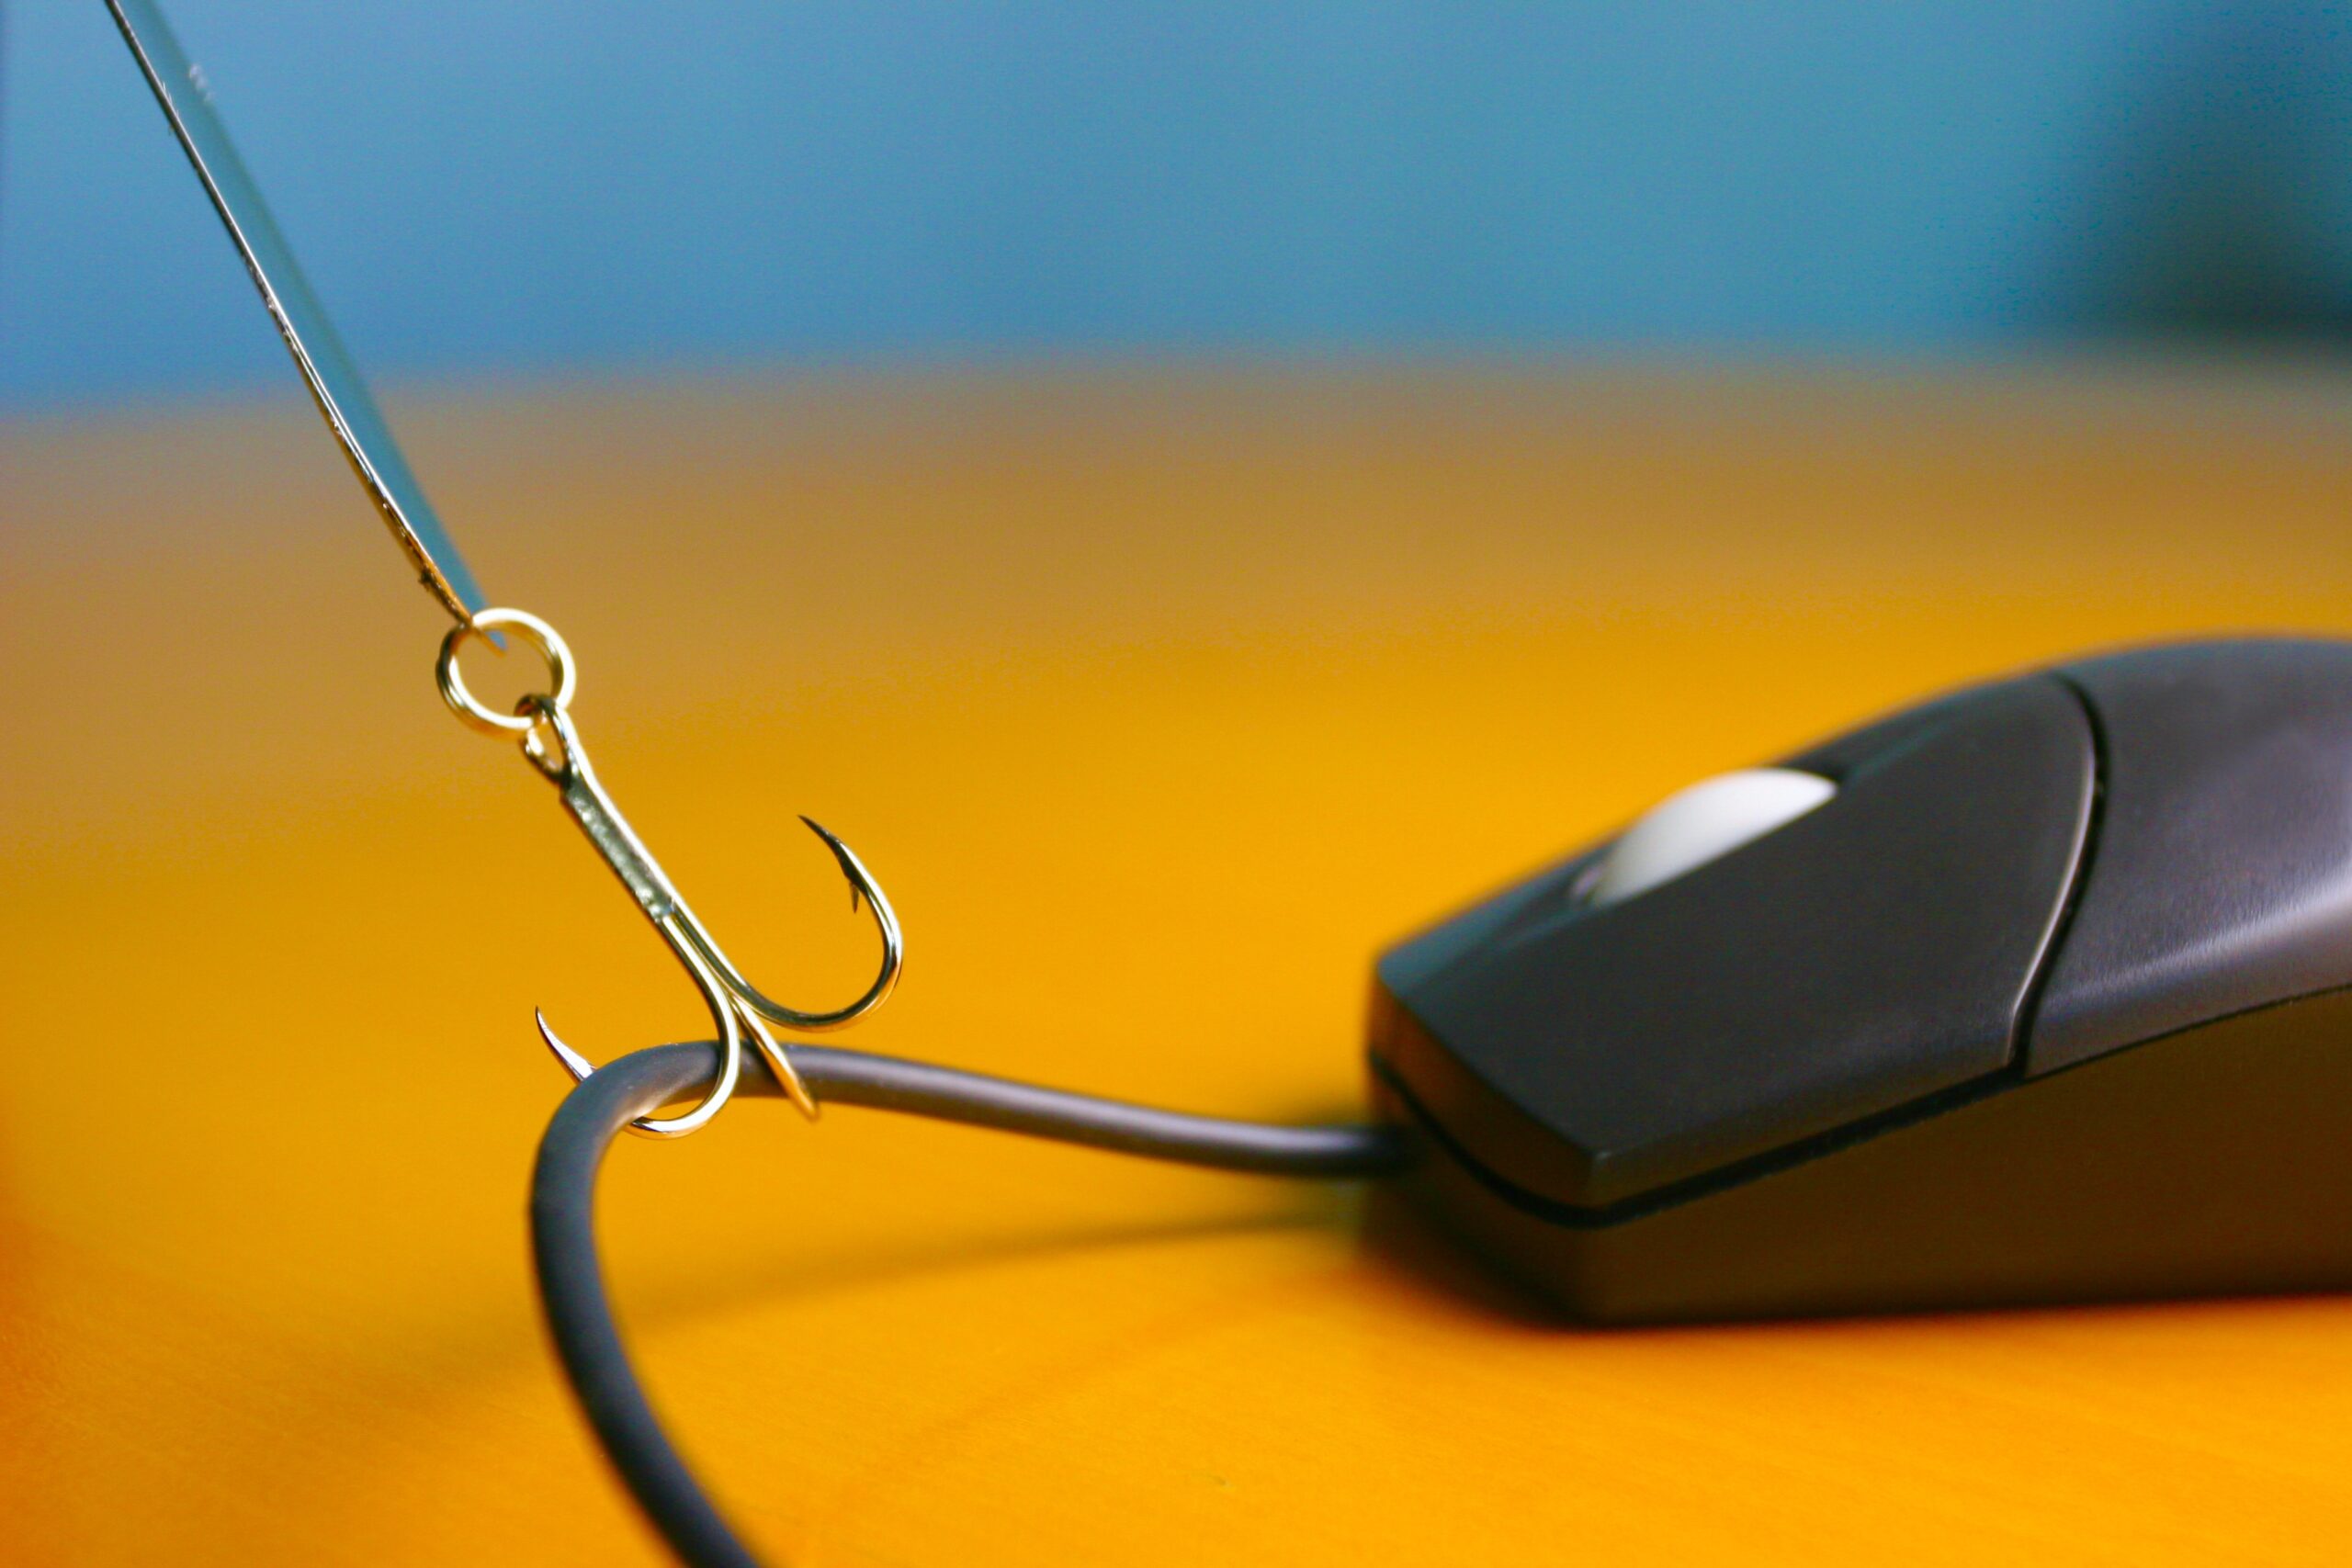 Photo of a fishhook catching the wire of a computer mouse on an orange desktop.